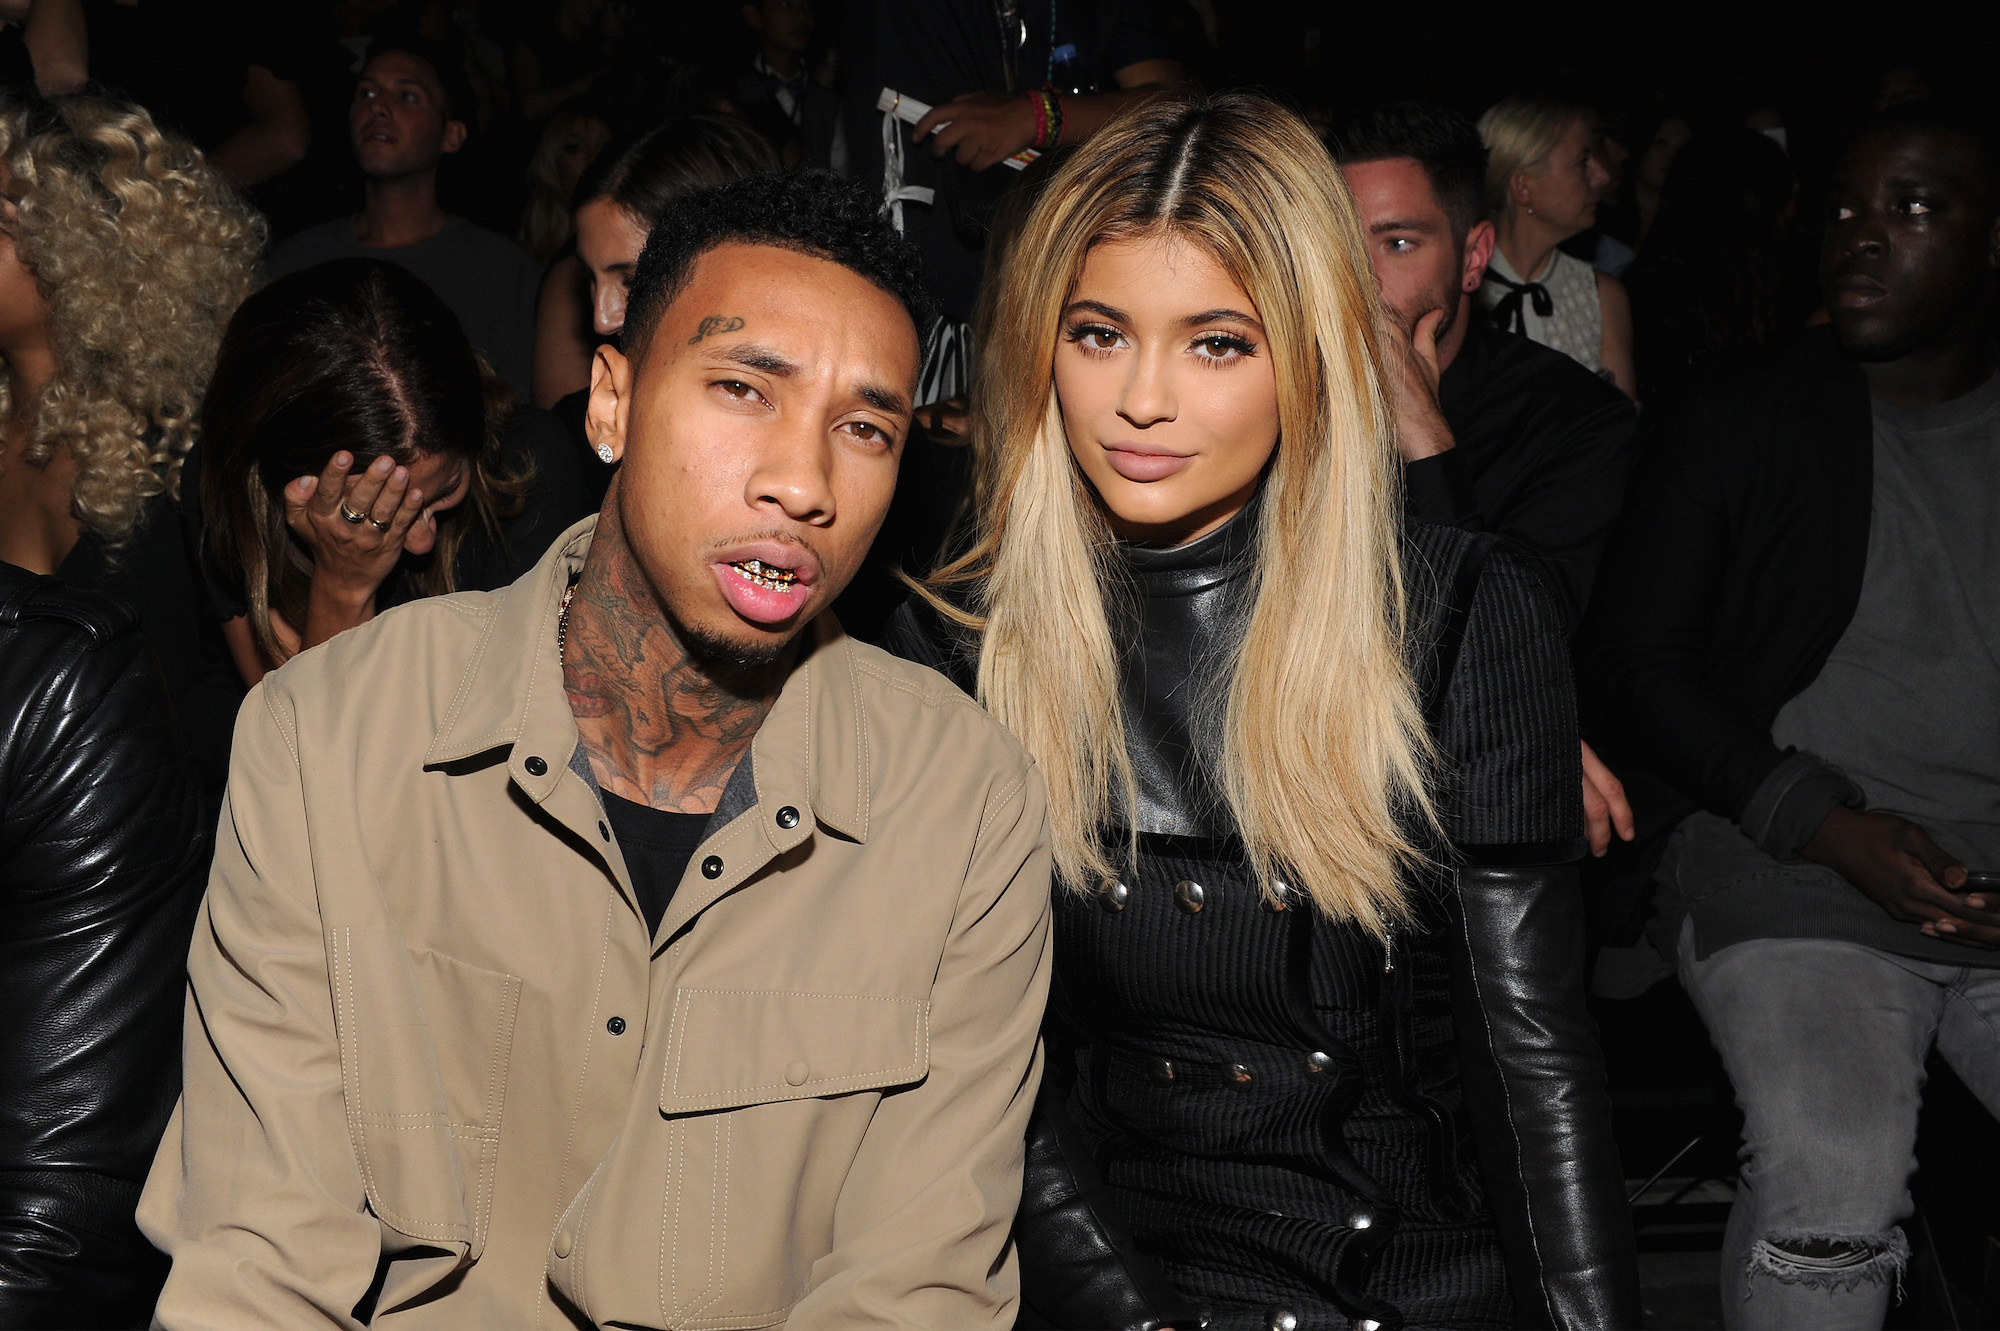 Was Kylie Jenner’s Relationship With Tyga Proof Kris and Caitlyn Jenner Were Bad Parents?